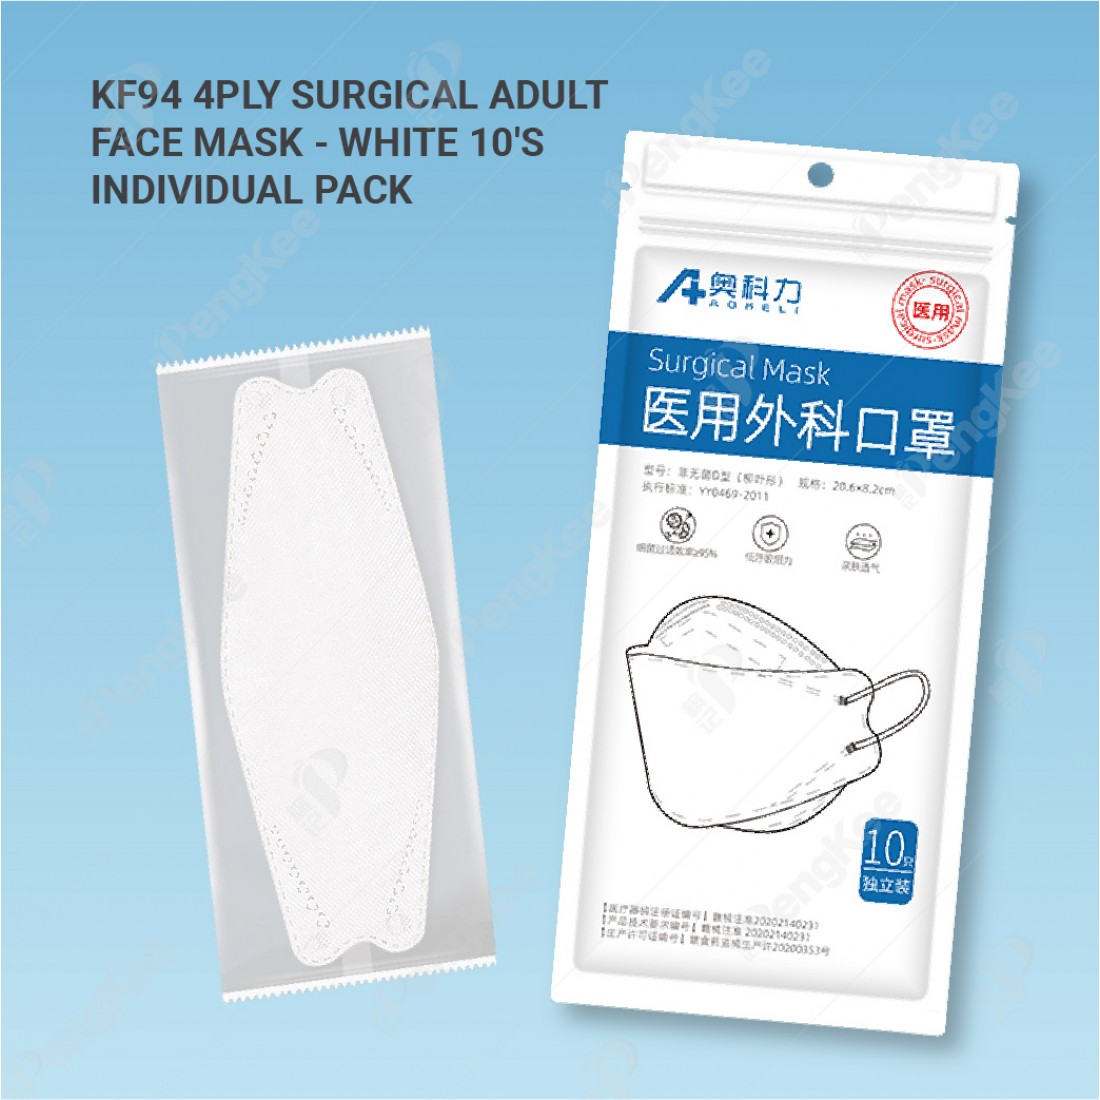 KF94 4PLY SURGICAL ADULT FACE MASK -WHITE (INDIVIDUAL PACK)